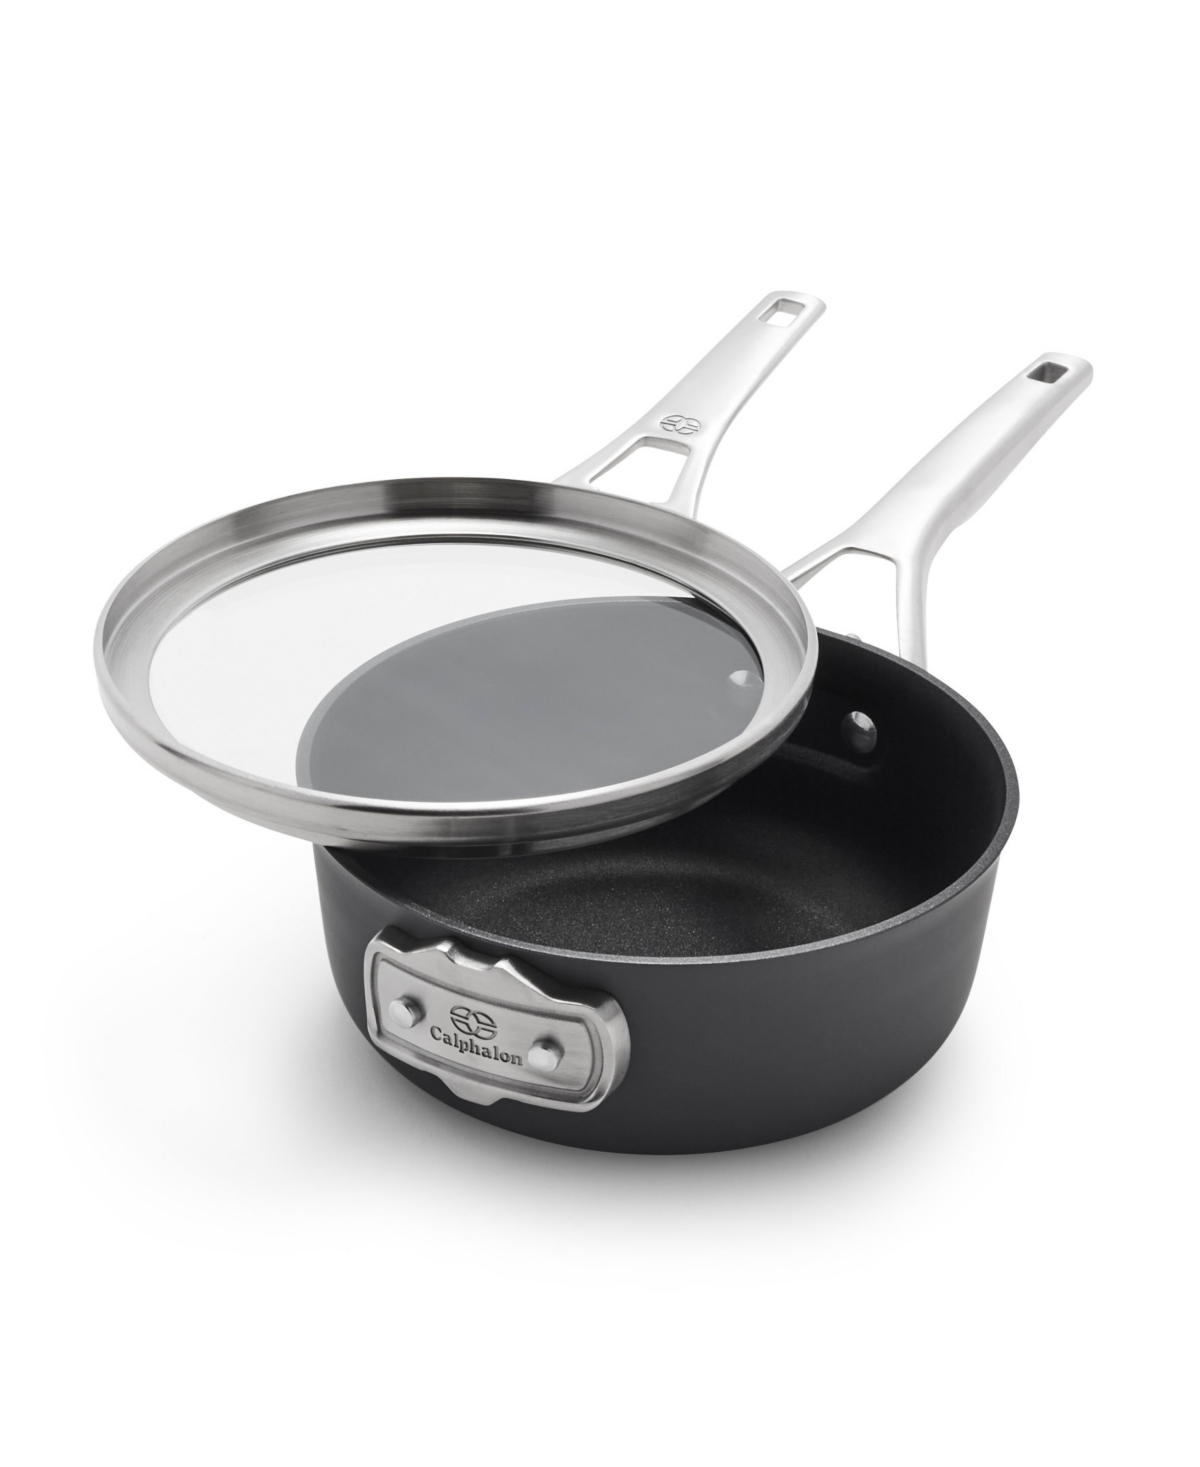 Calphalon Premier Space-saving Hard-anodized Aluminum Nonstick, 2.5-quart Sauce Pan With Lid In Black,stainless Steel